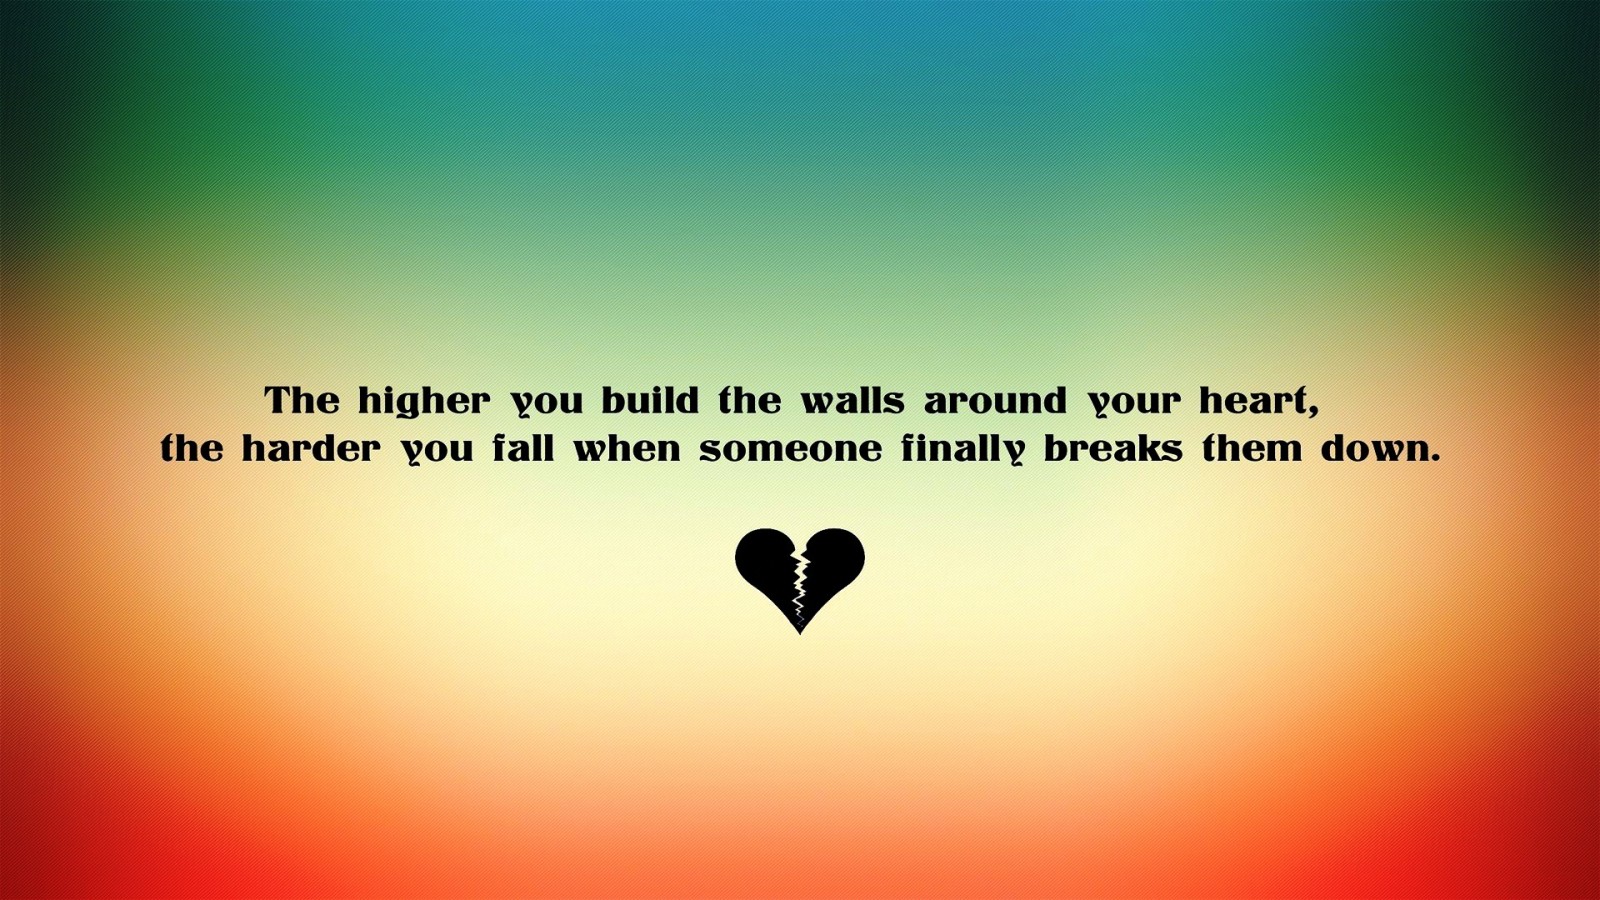 Broken Heart Quotes With Image